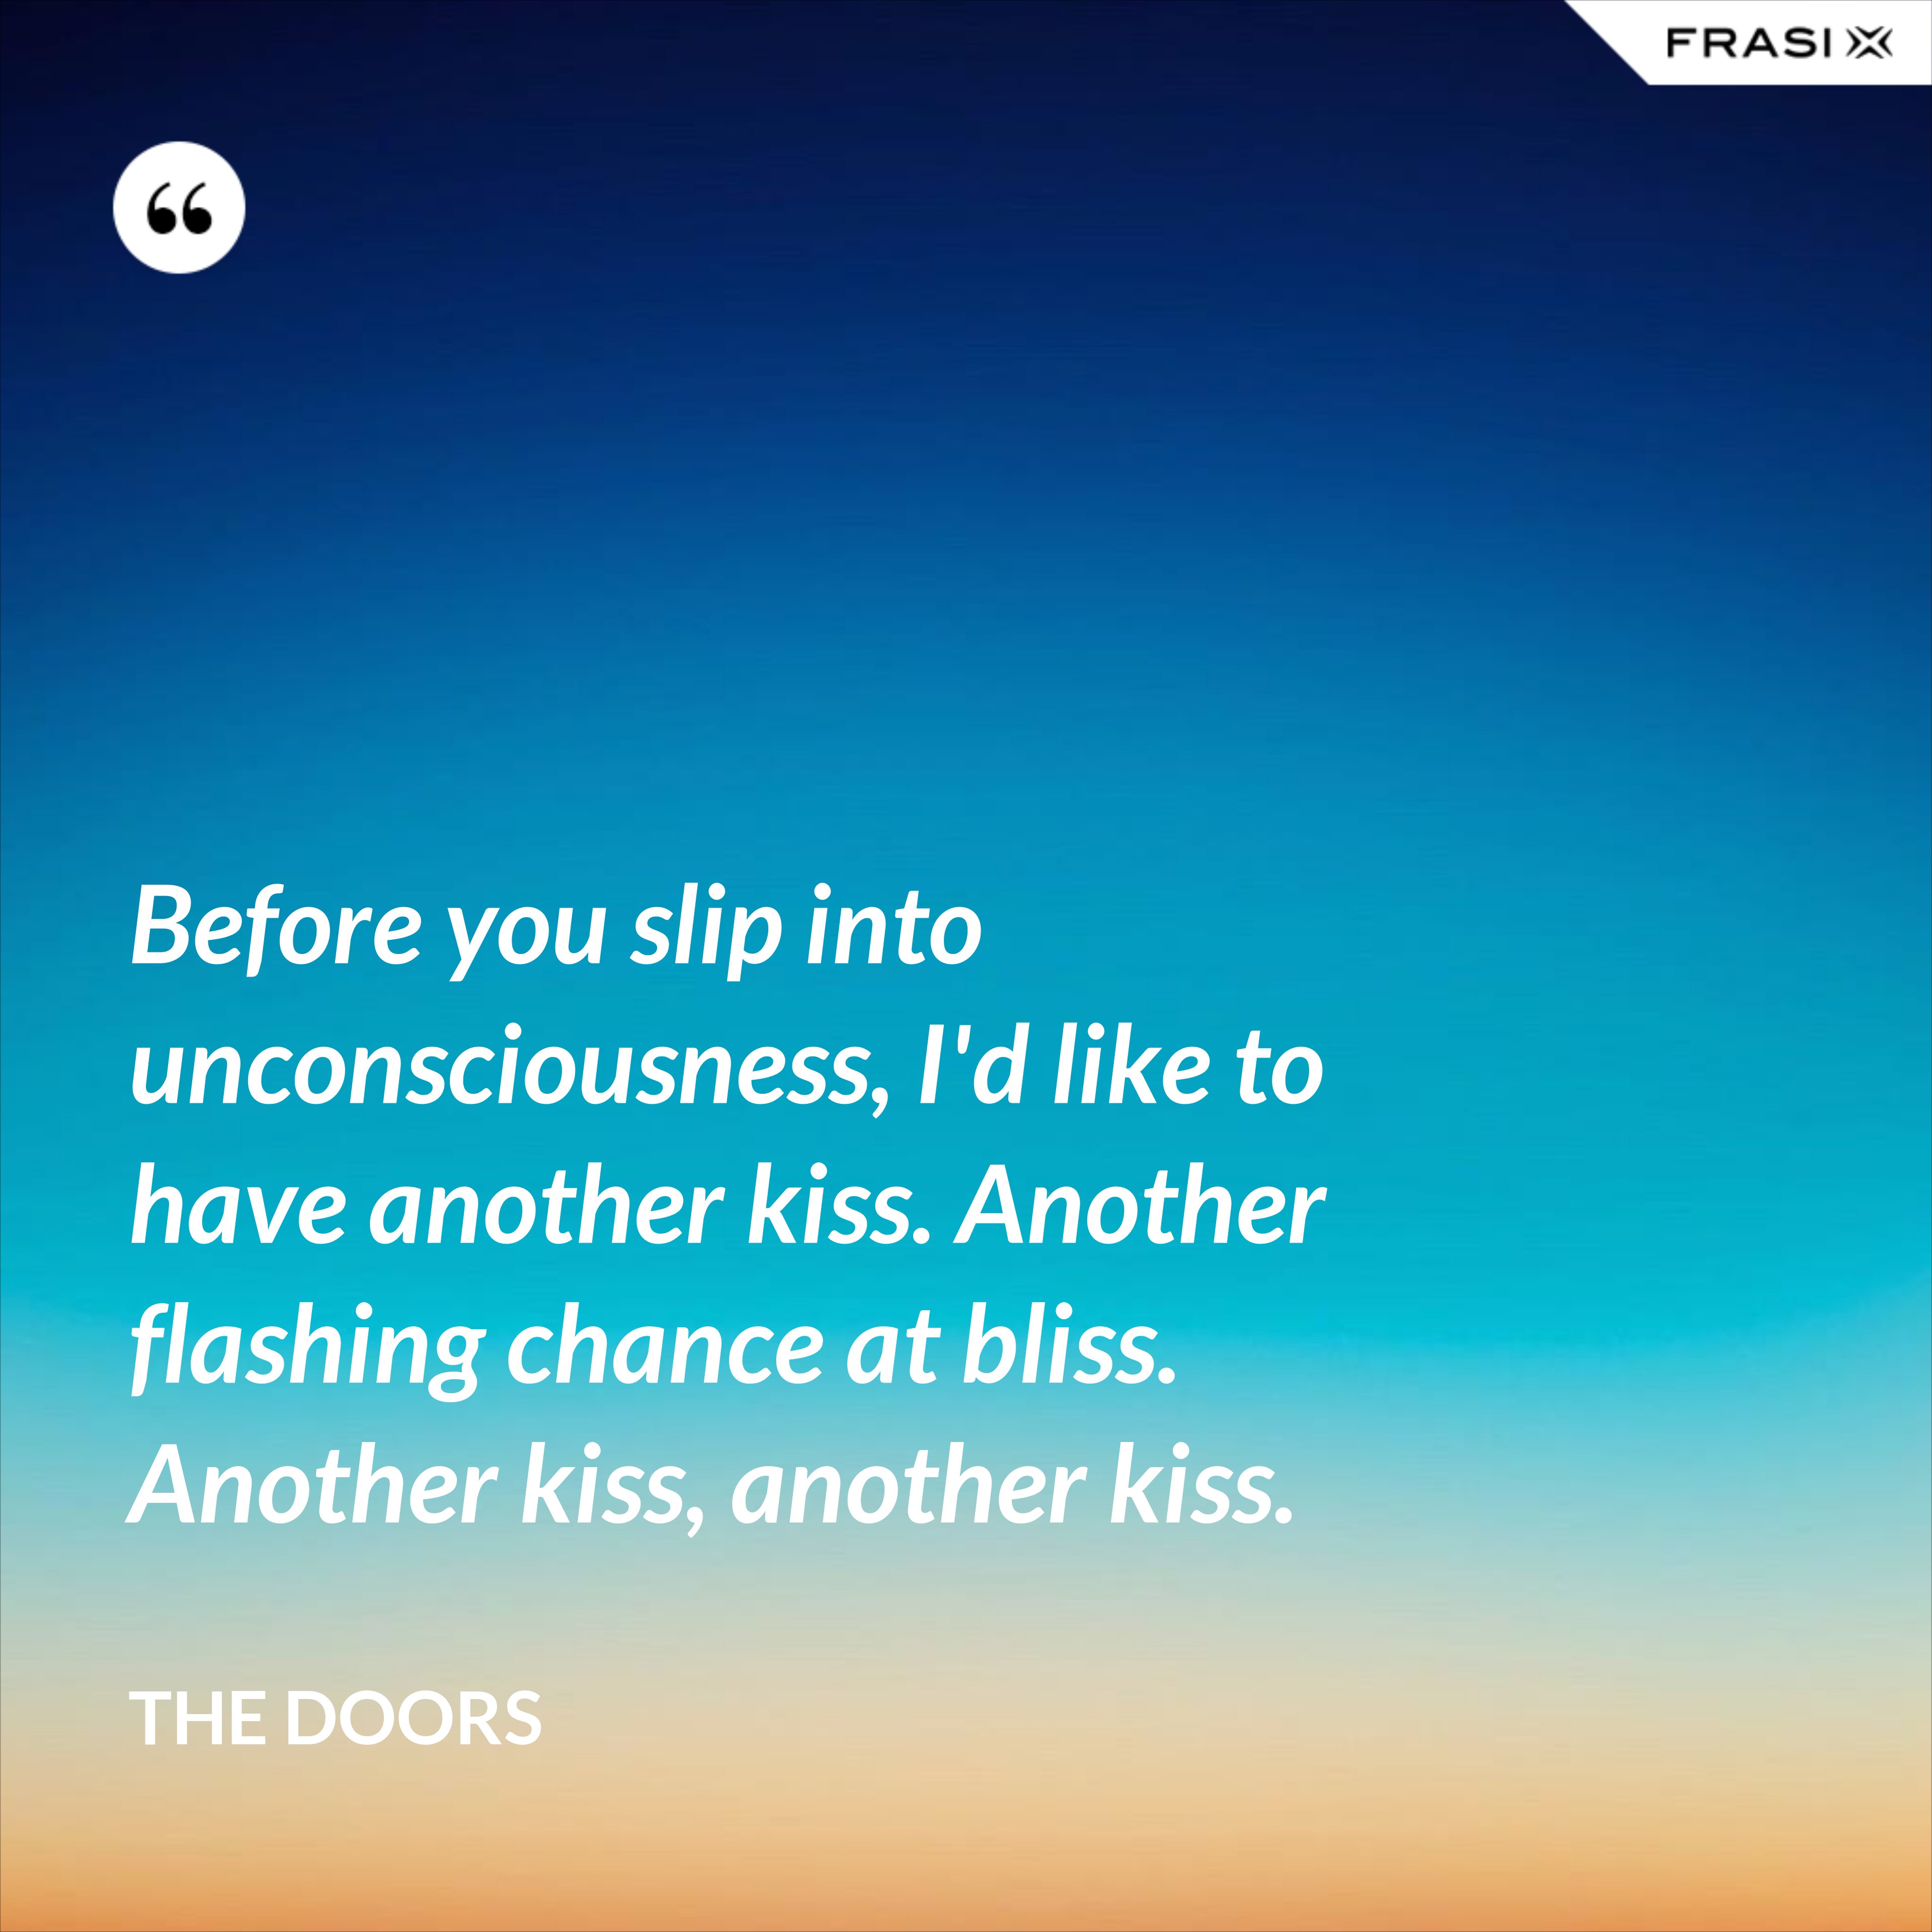 Before you slip into unconsciousness, I'd like to have another kiss. Another flashing chance at bliss. Another kiss, another kiss. - The Doors